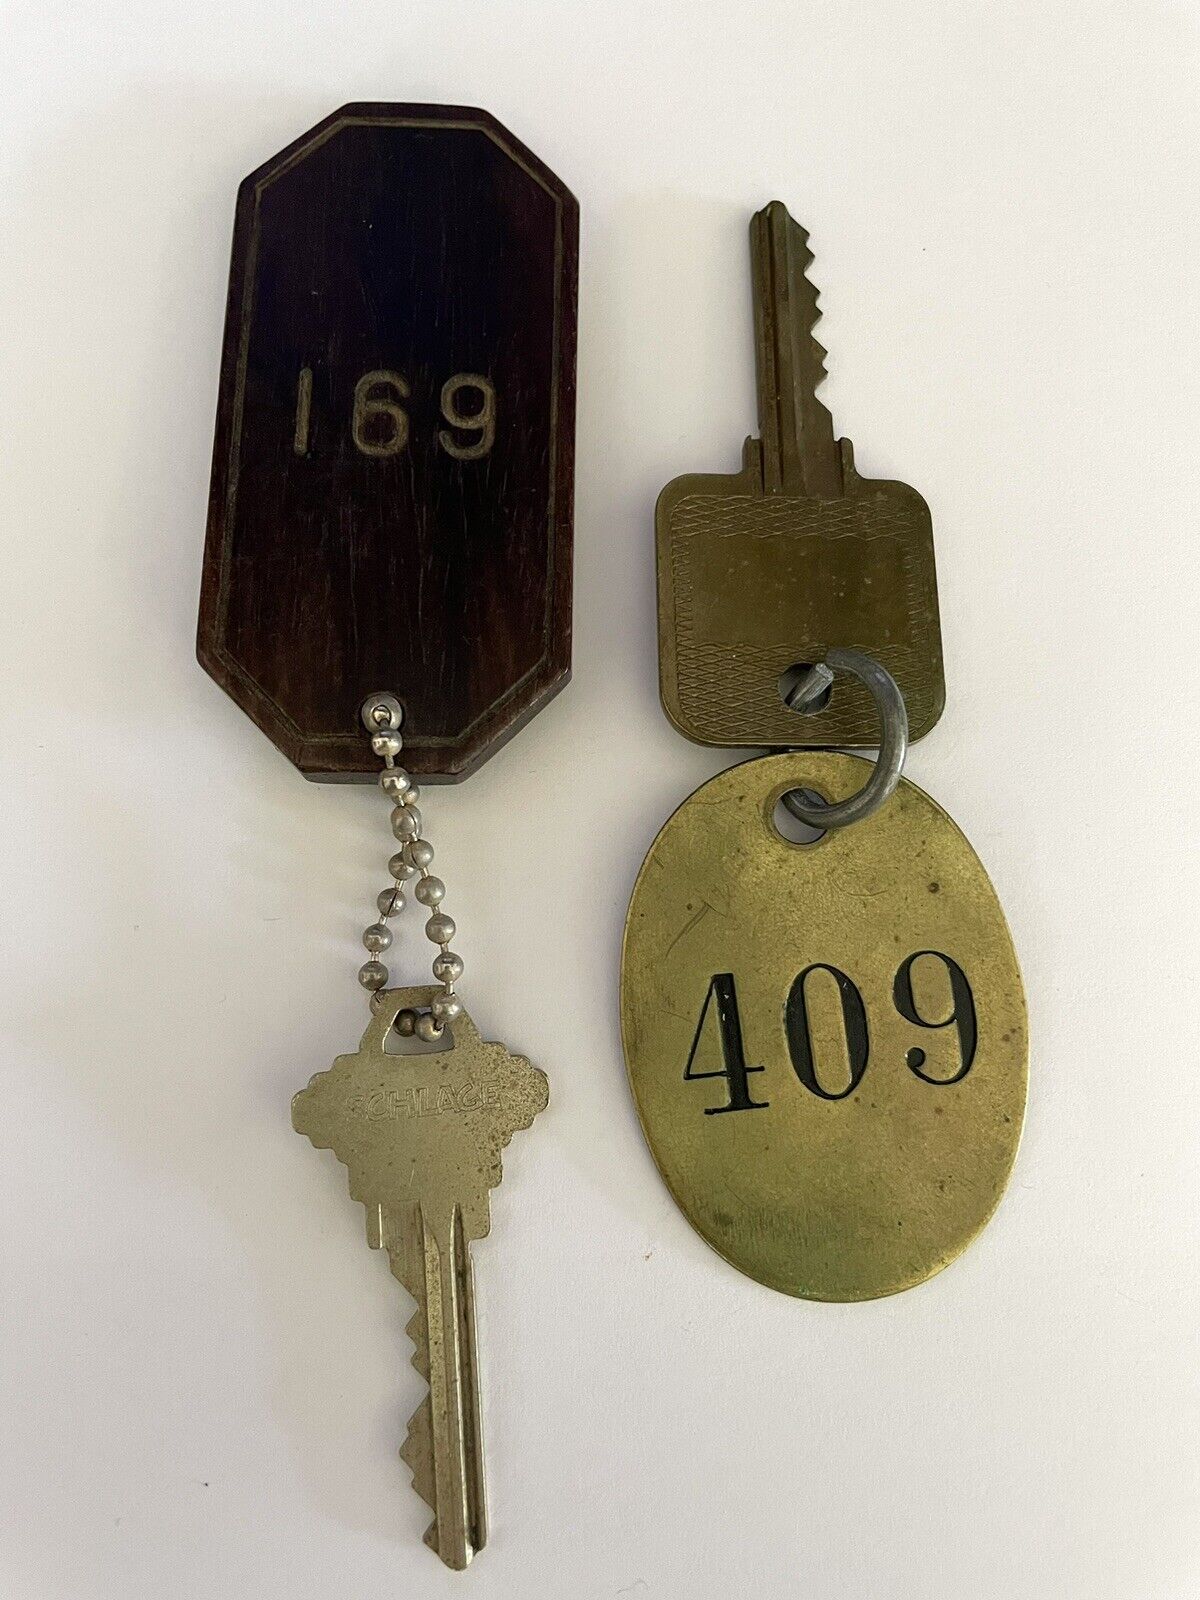 VTG Pair of Hotel Motel Room Keys with Large Wood and Brass Fobs Rooms 409, 169